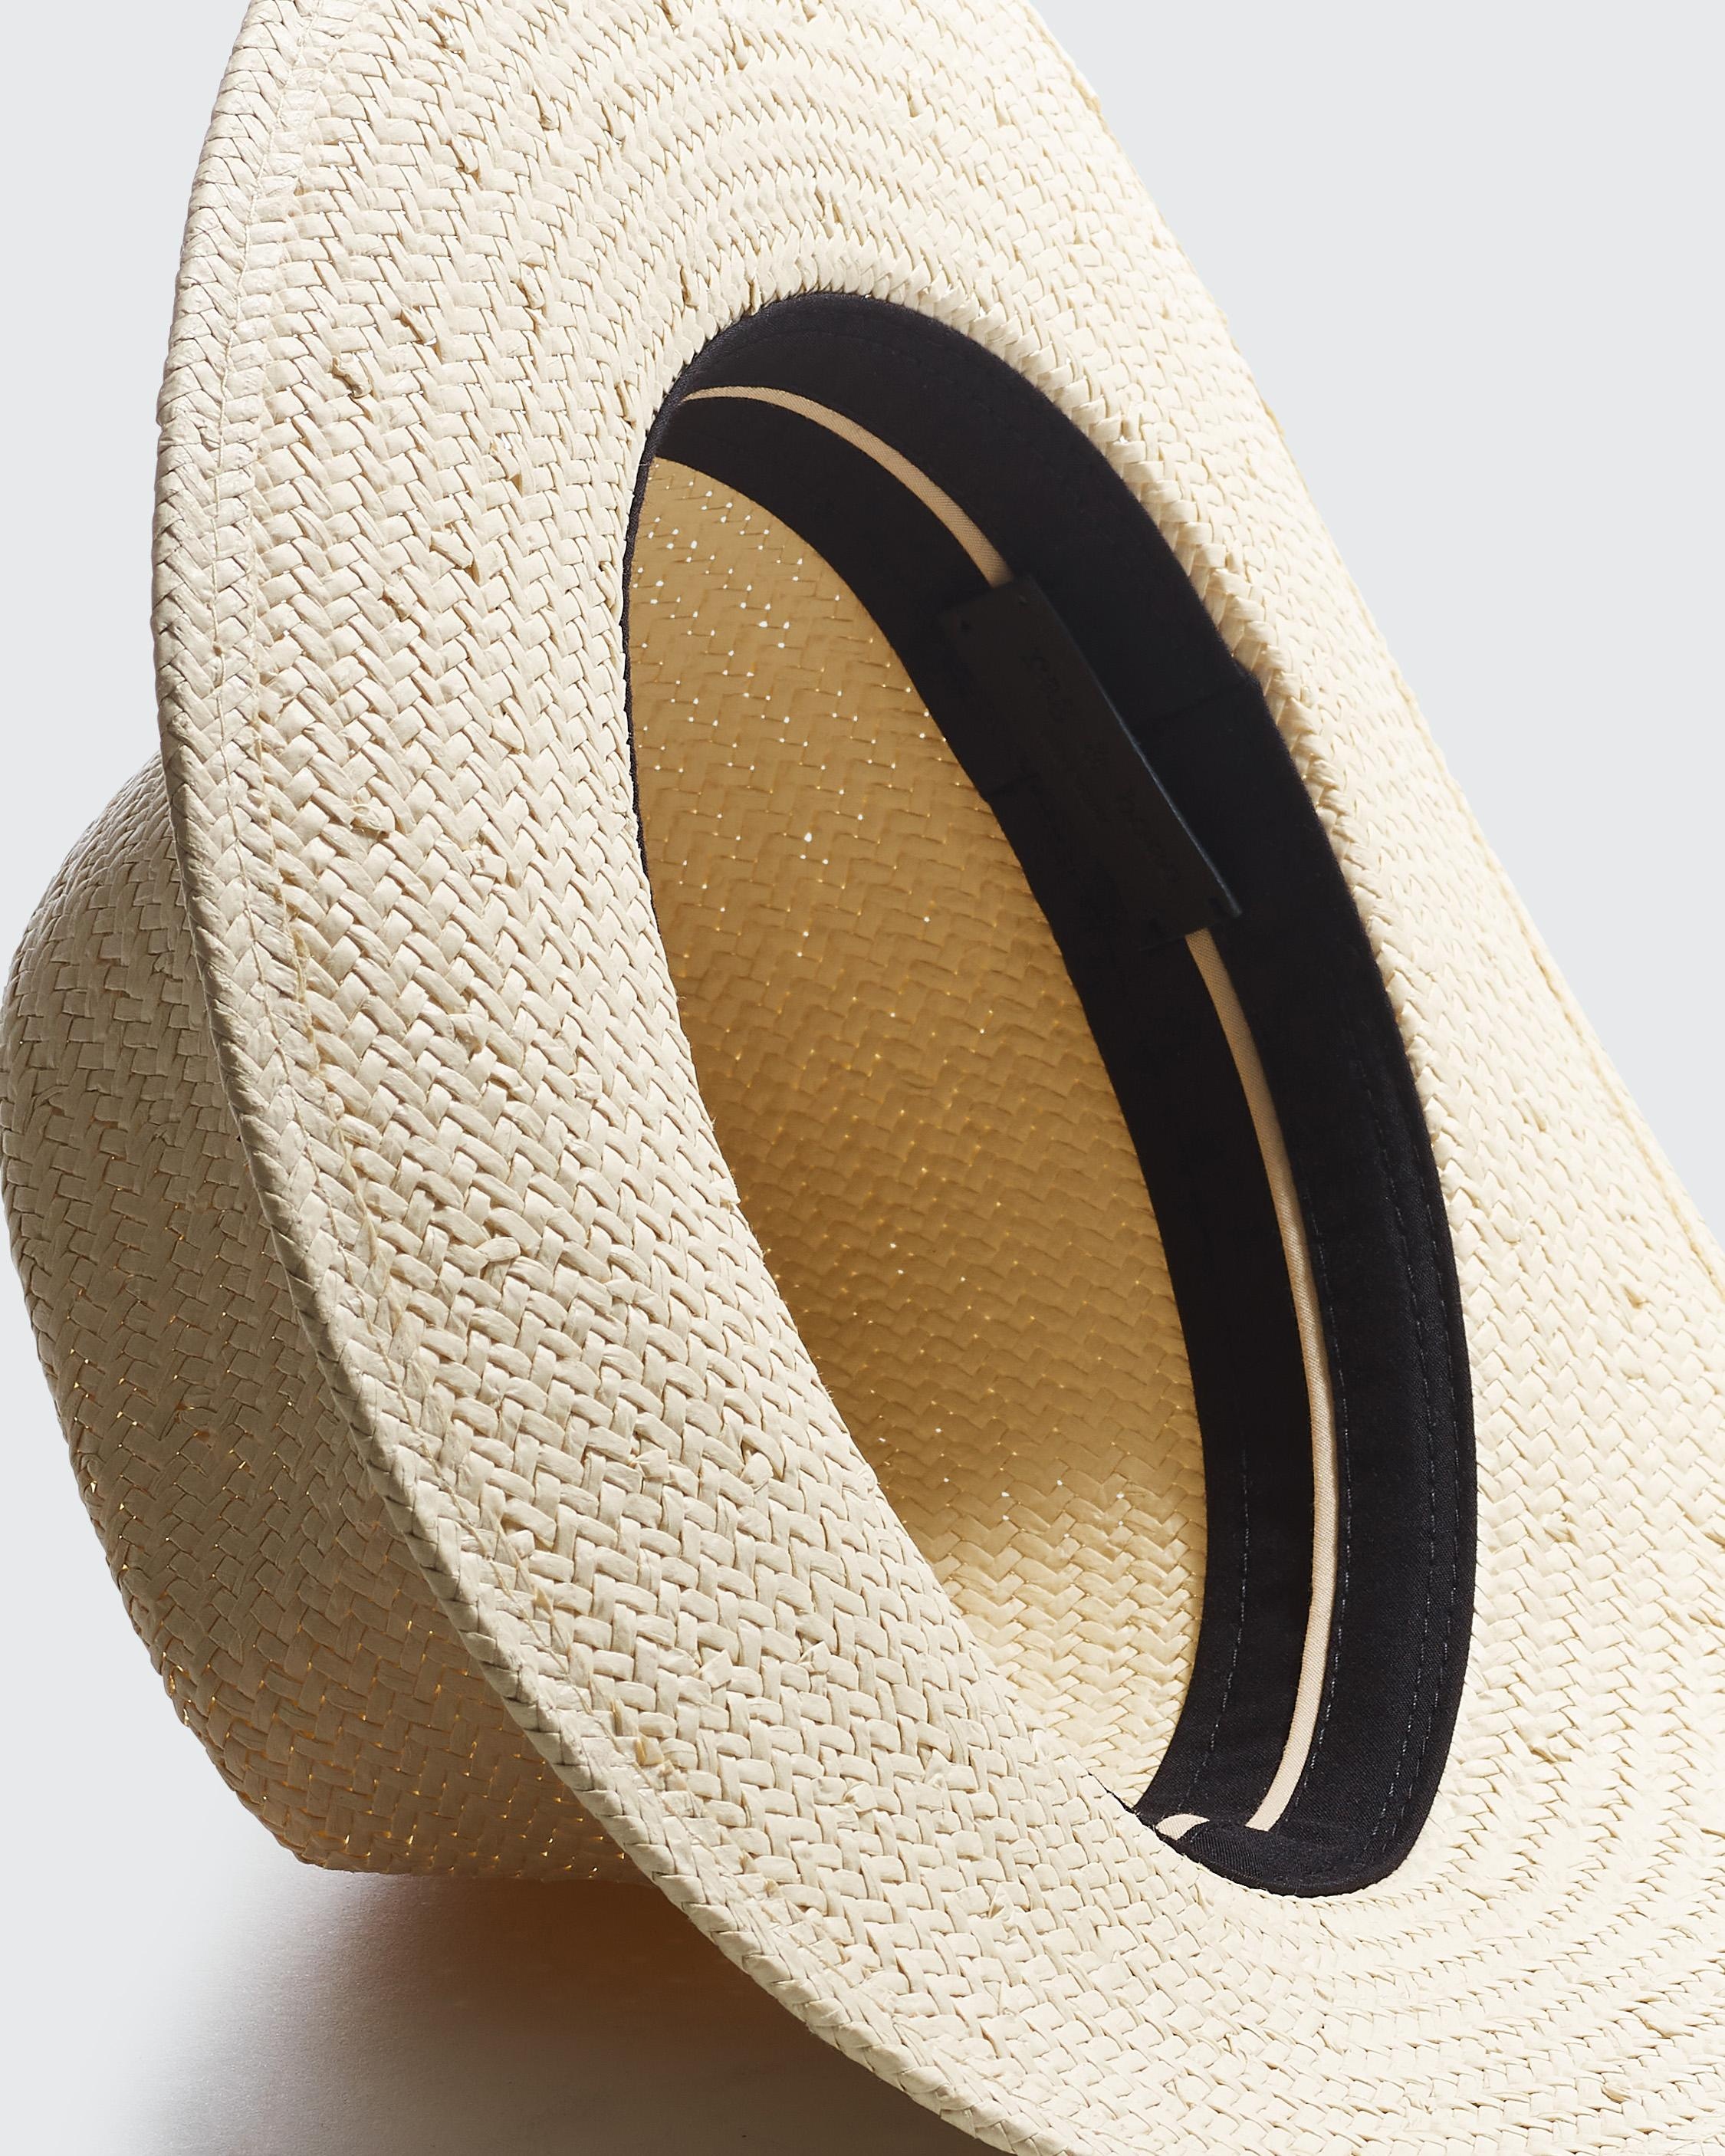 Packable Fedora
Straw Hat - 3